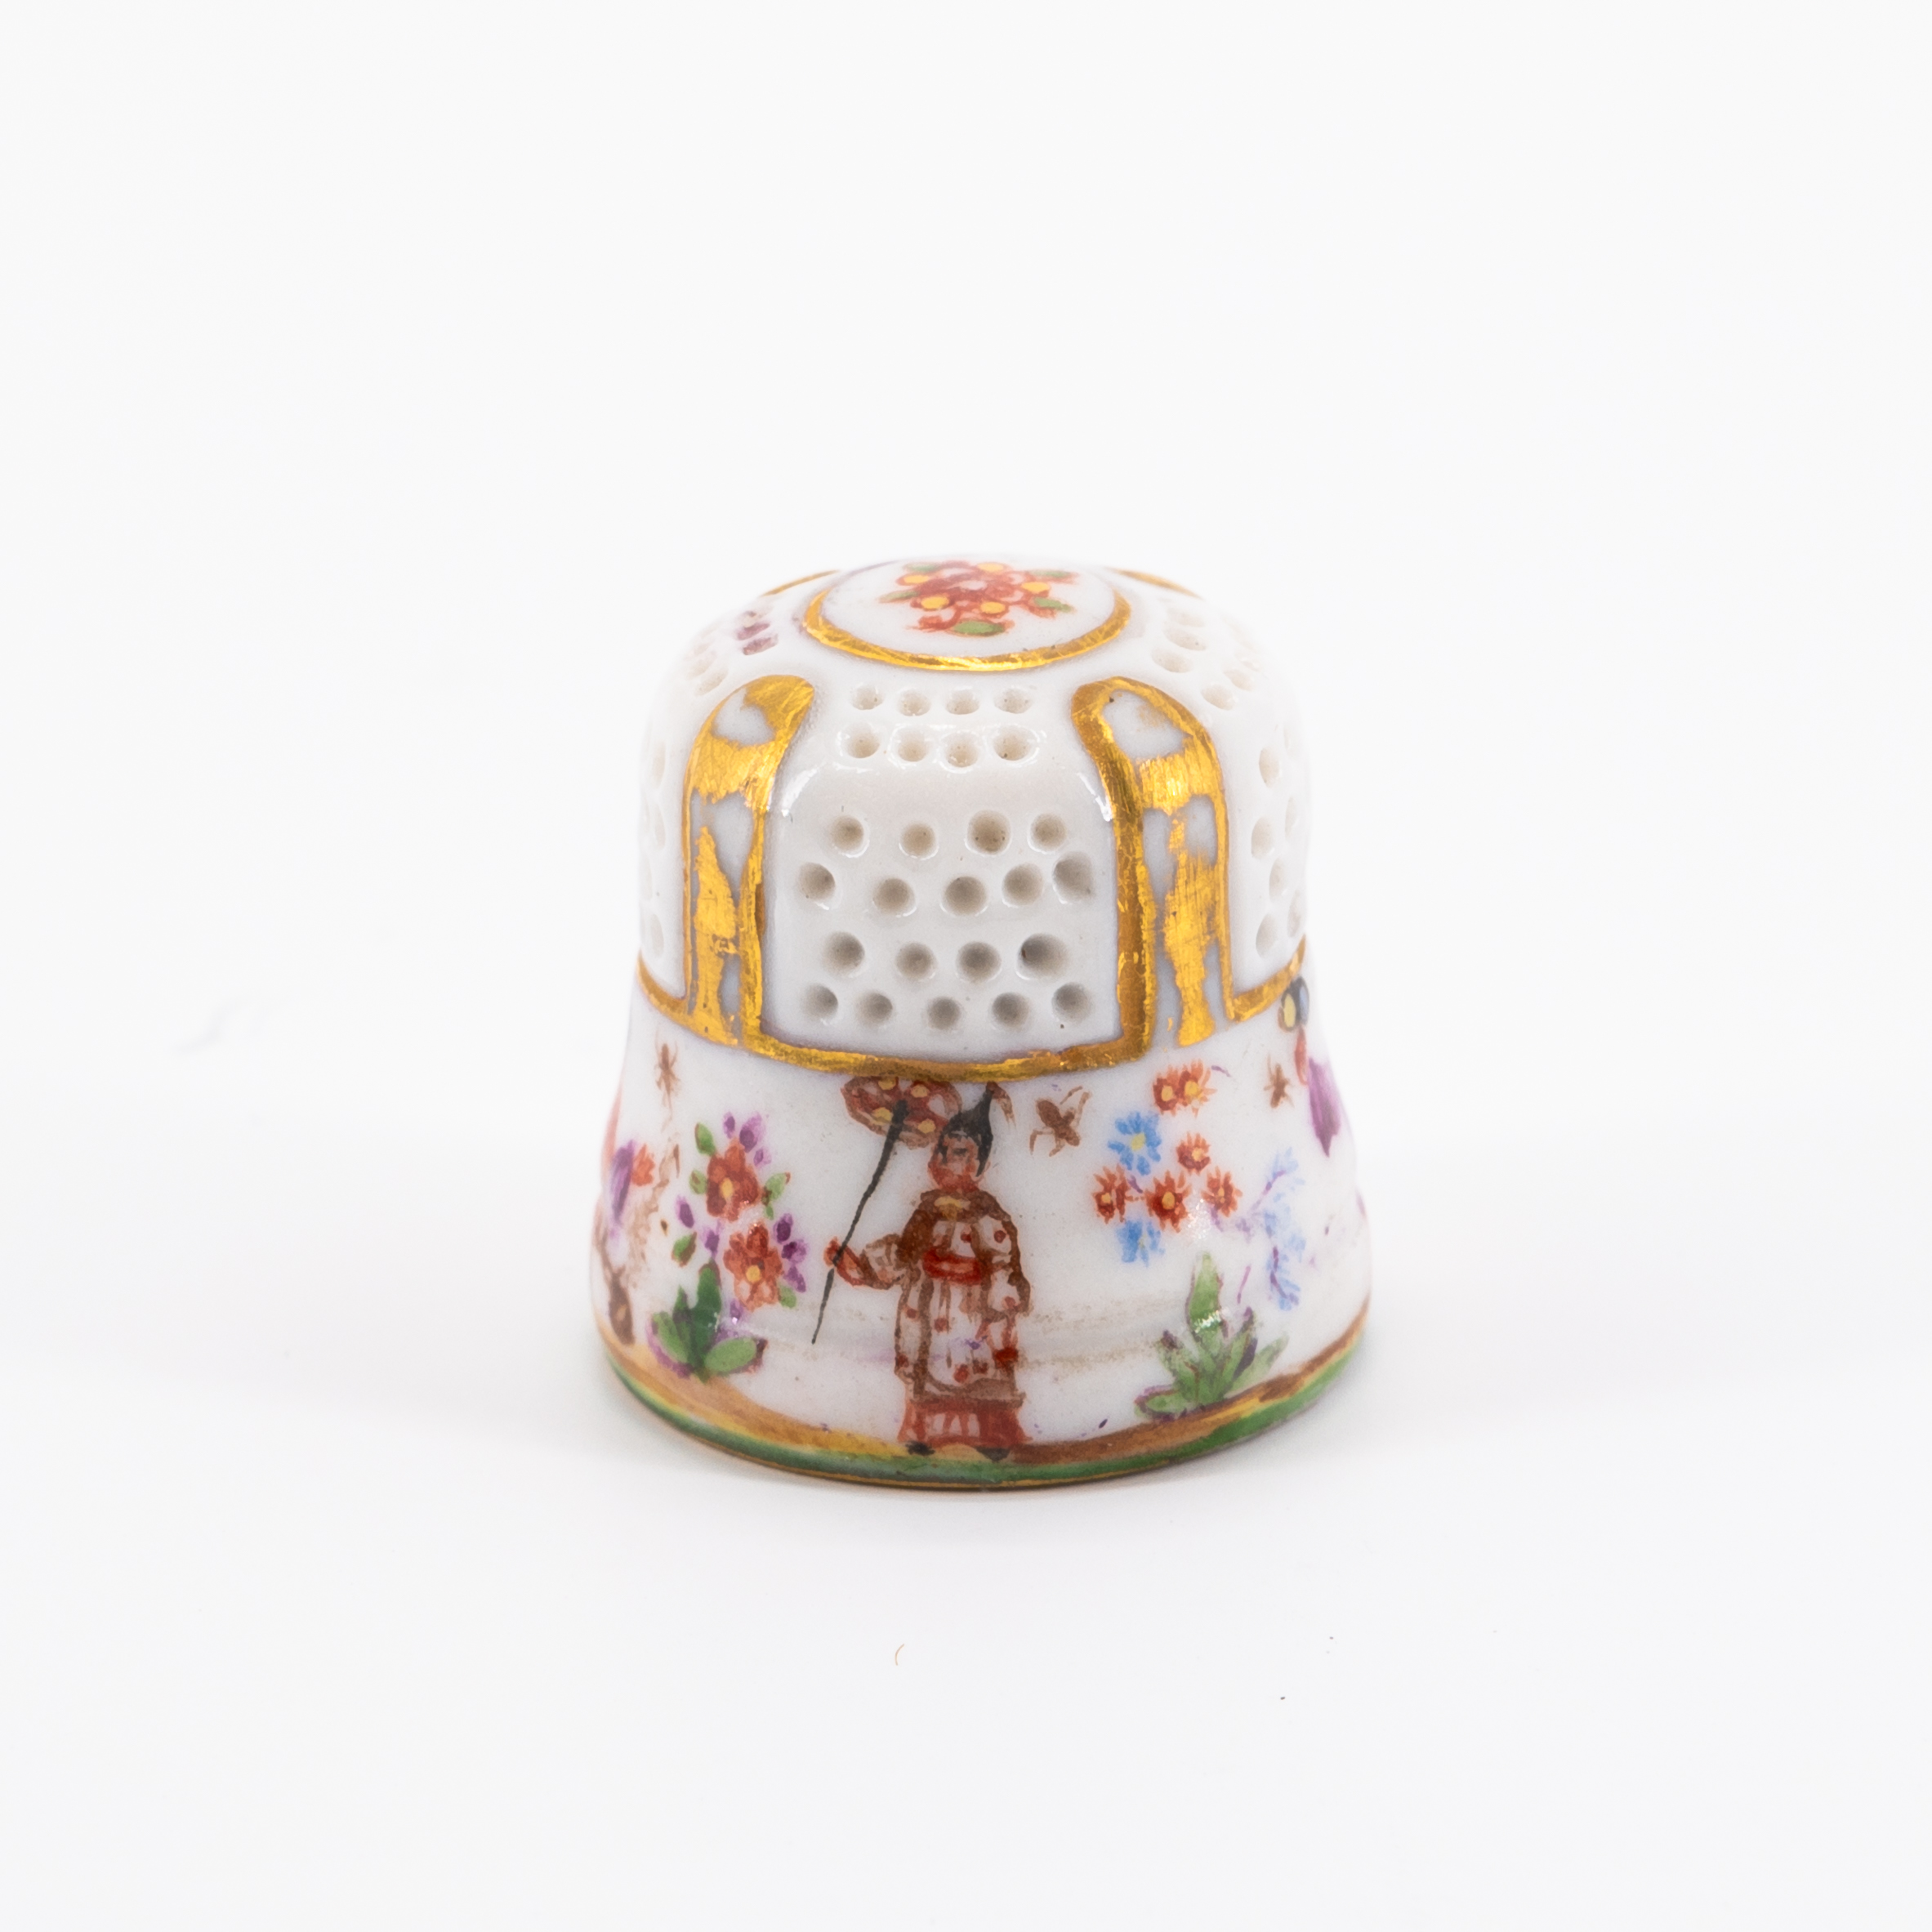 RARE PORCELAIN THIMBLE WITH VERY FINELY COLOURED CHINOISERIES - Image 3 of 6